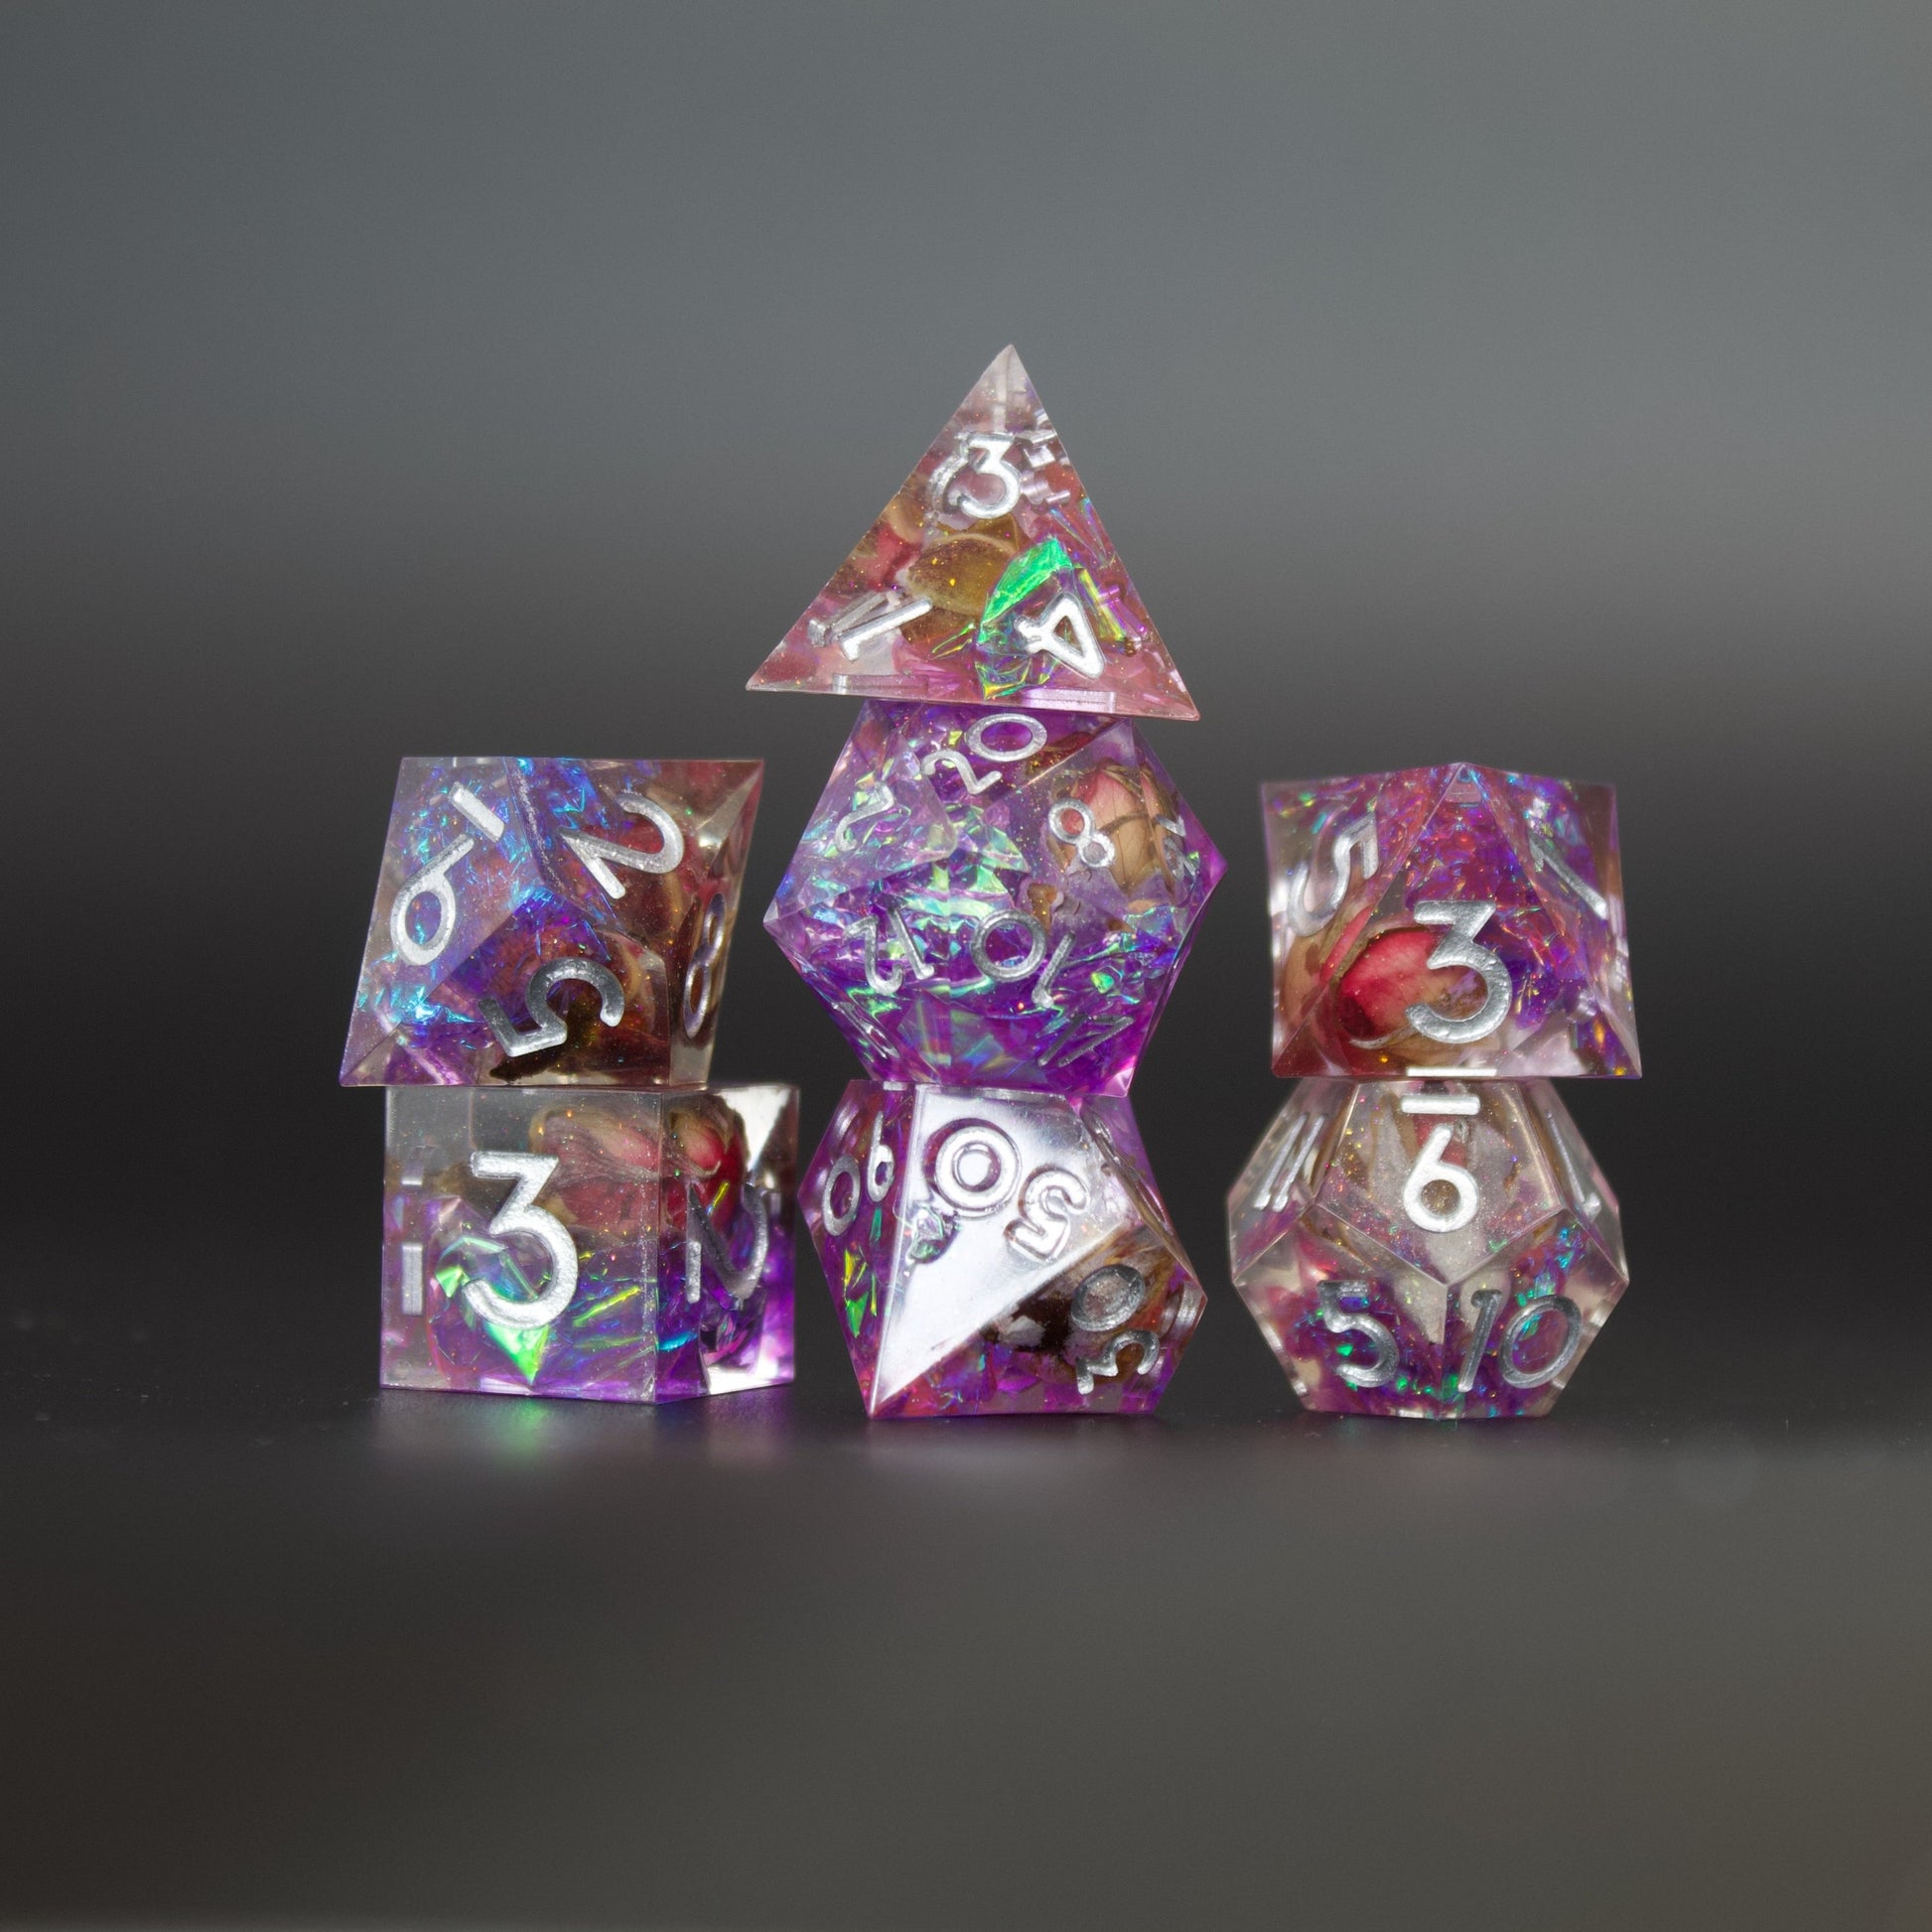 DND resin dice sets for dungeons and dragons and TTRPG role playing games and dice goblin, dice dragon collectors